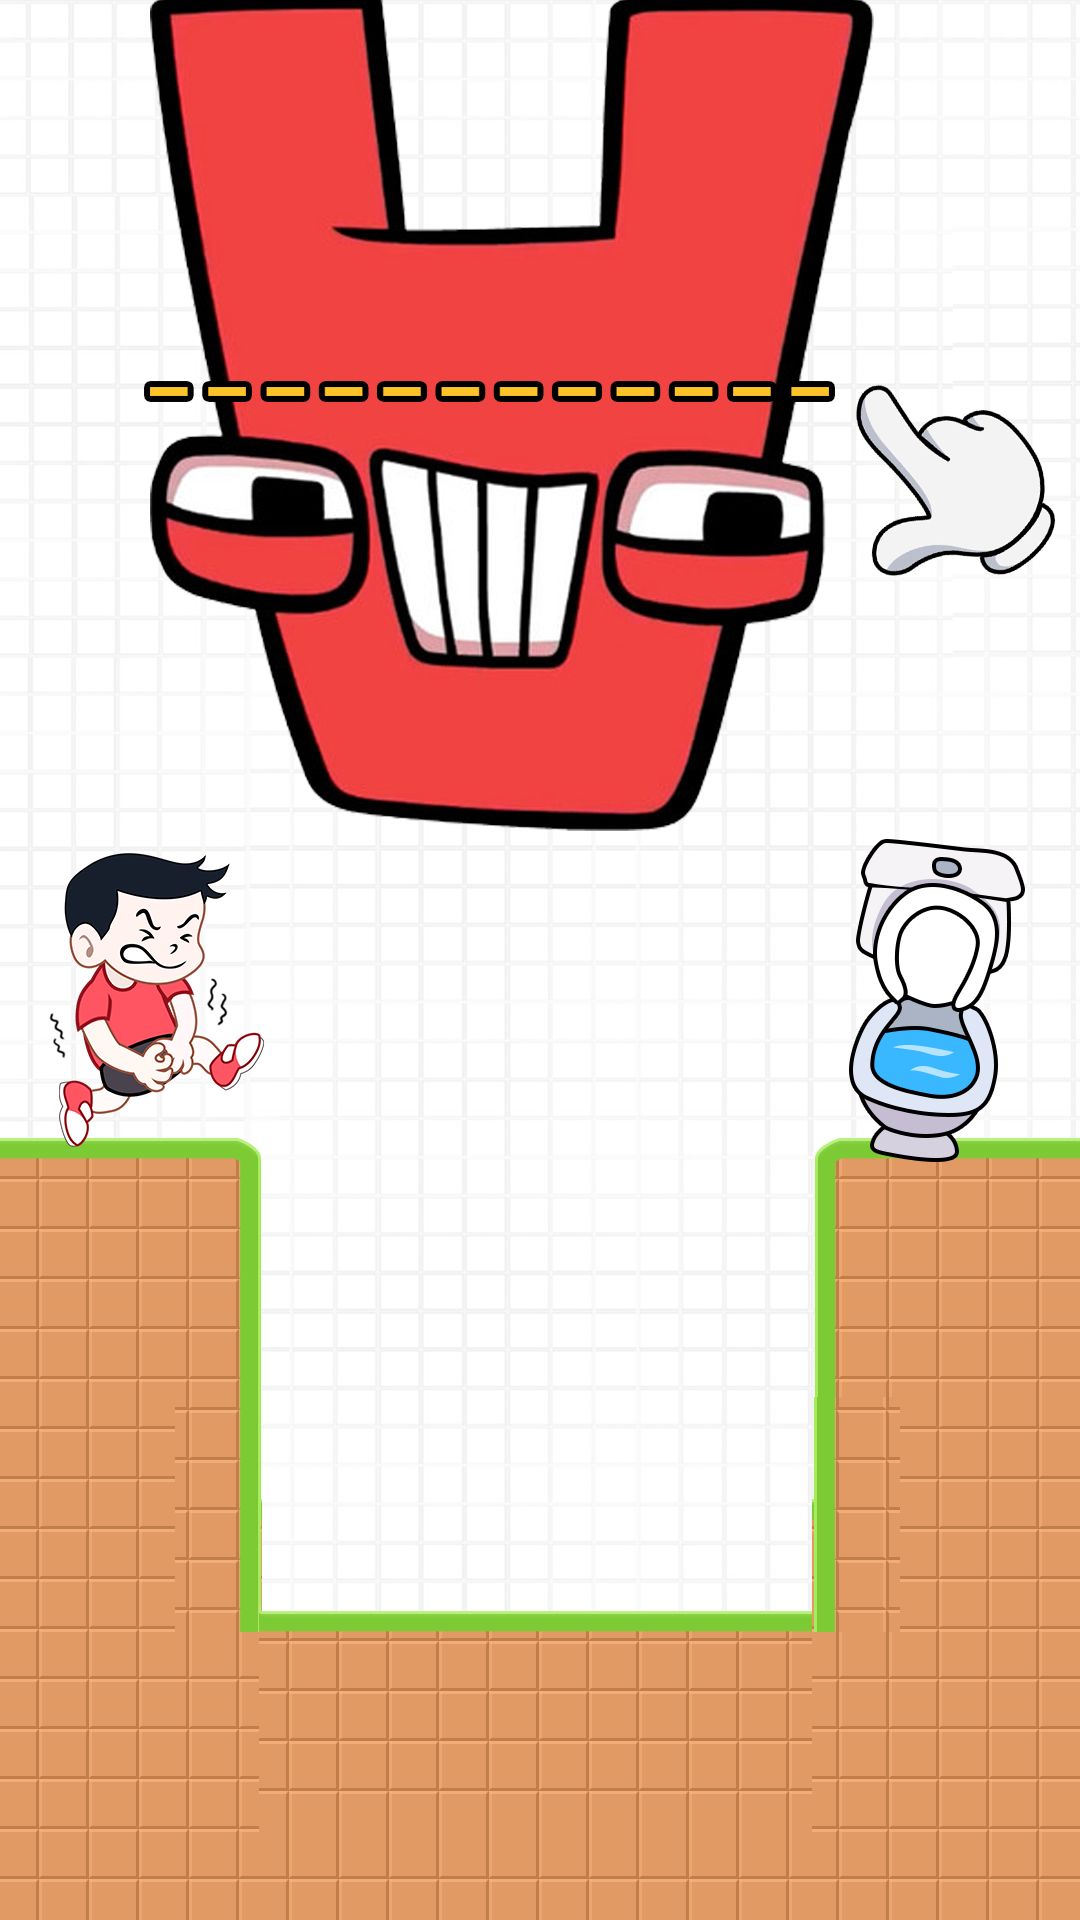 Full version of Android Logic game apk Toilet Run: Bridge Slice for tablet and phone.